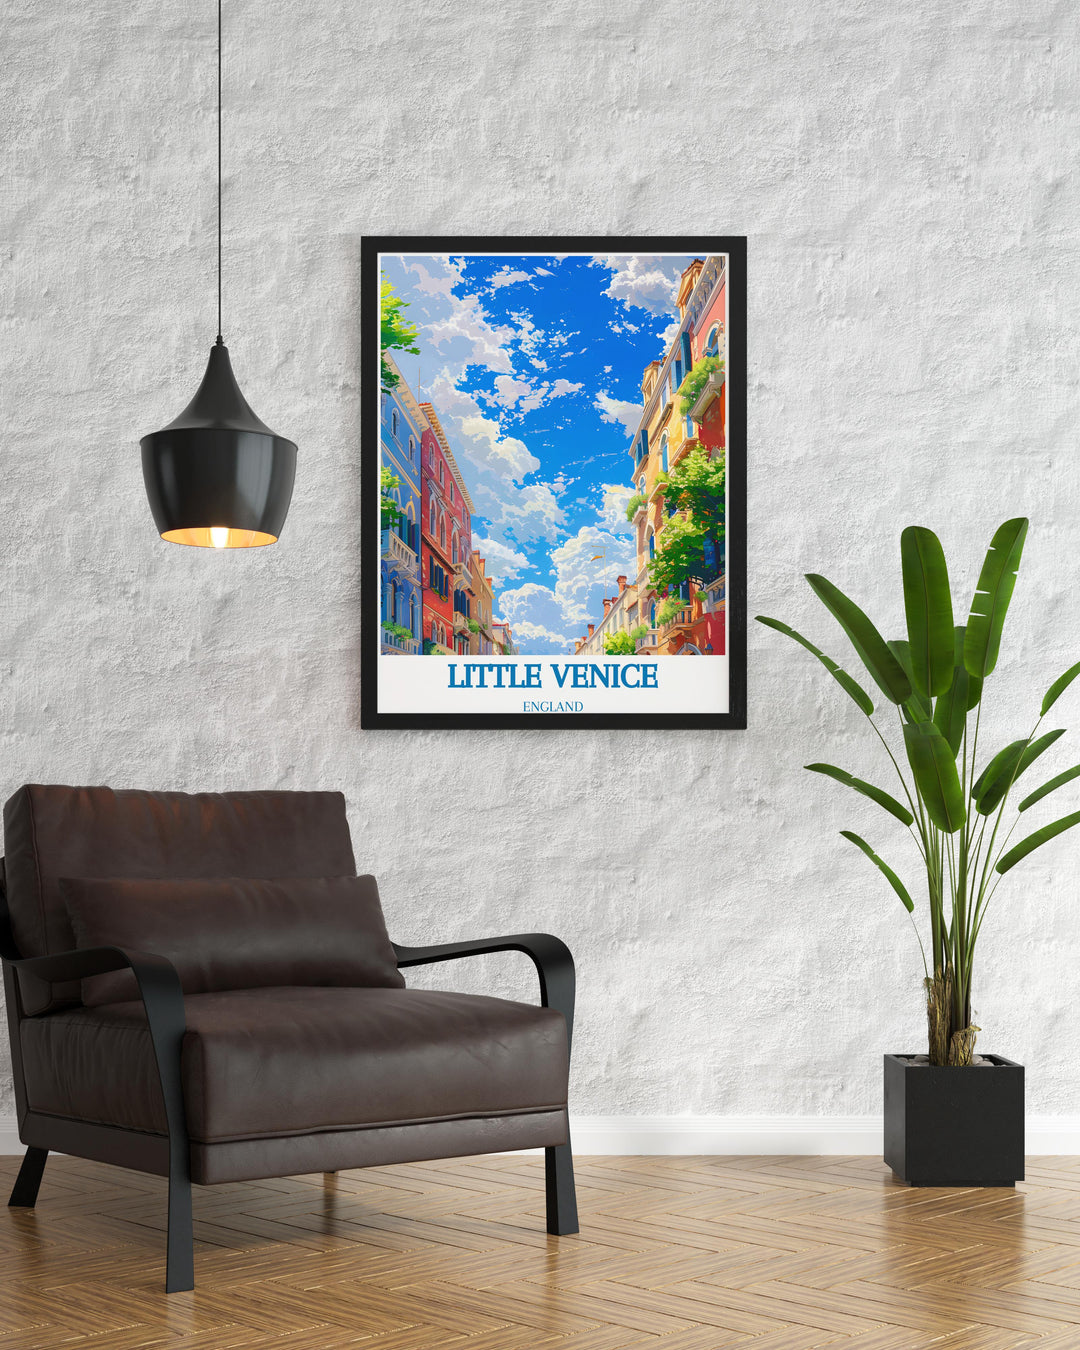 Wall art of Little Venices iconic mews, ideal for enhancing your living space with elements of Londons architectural beauty.